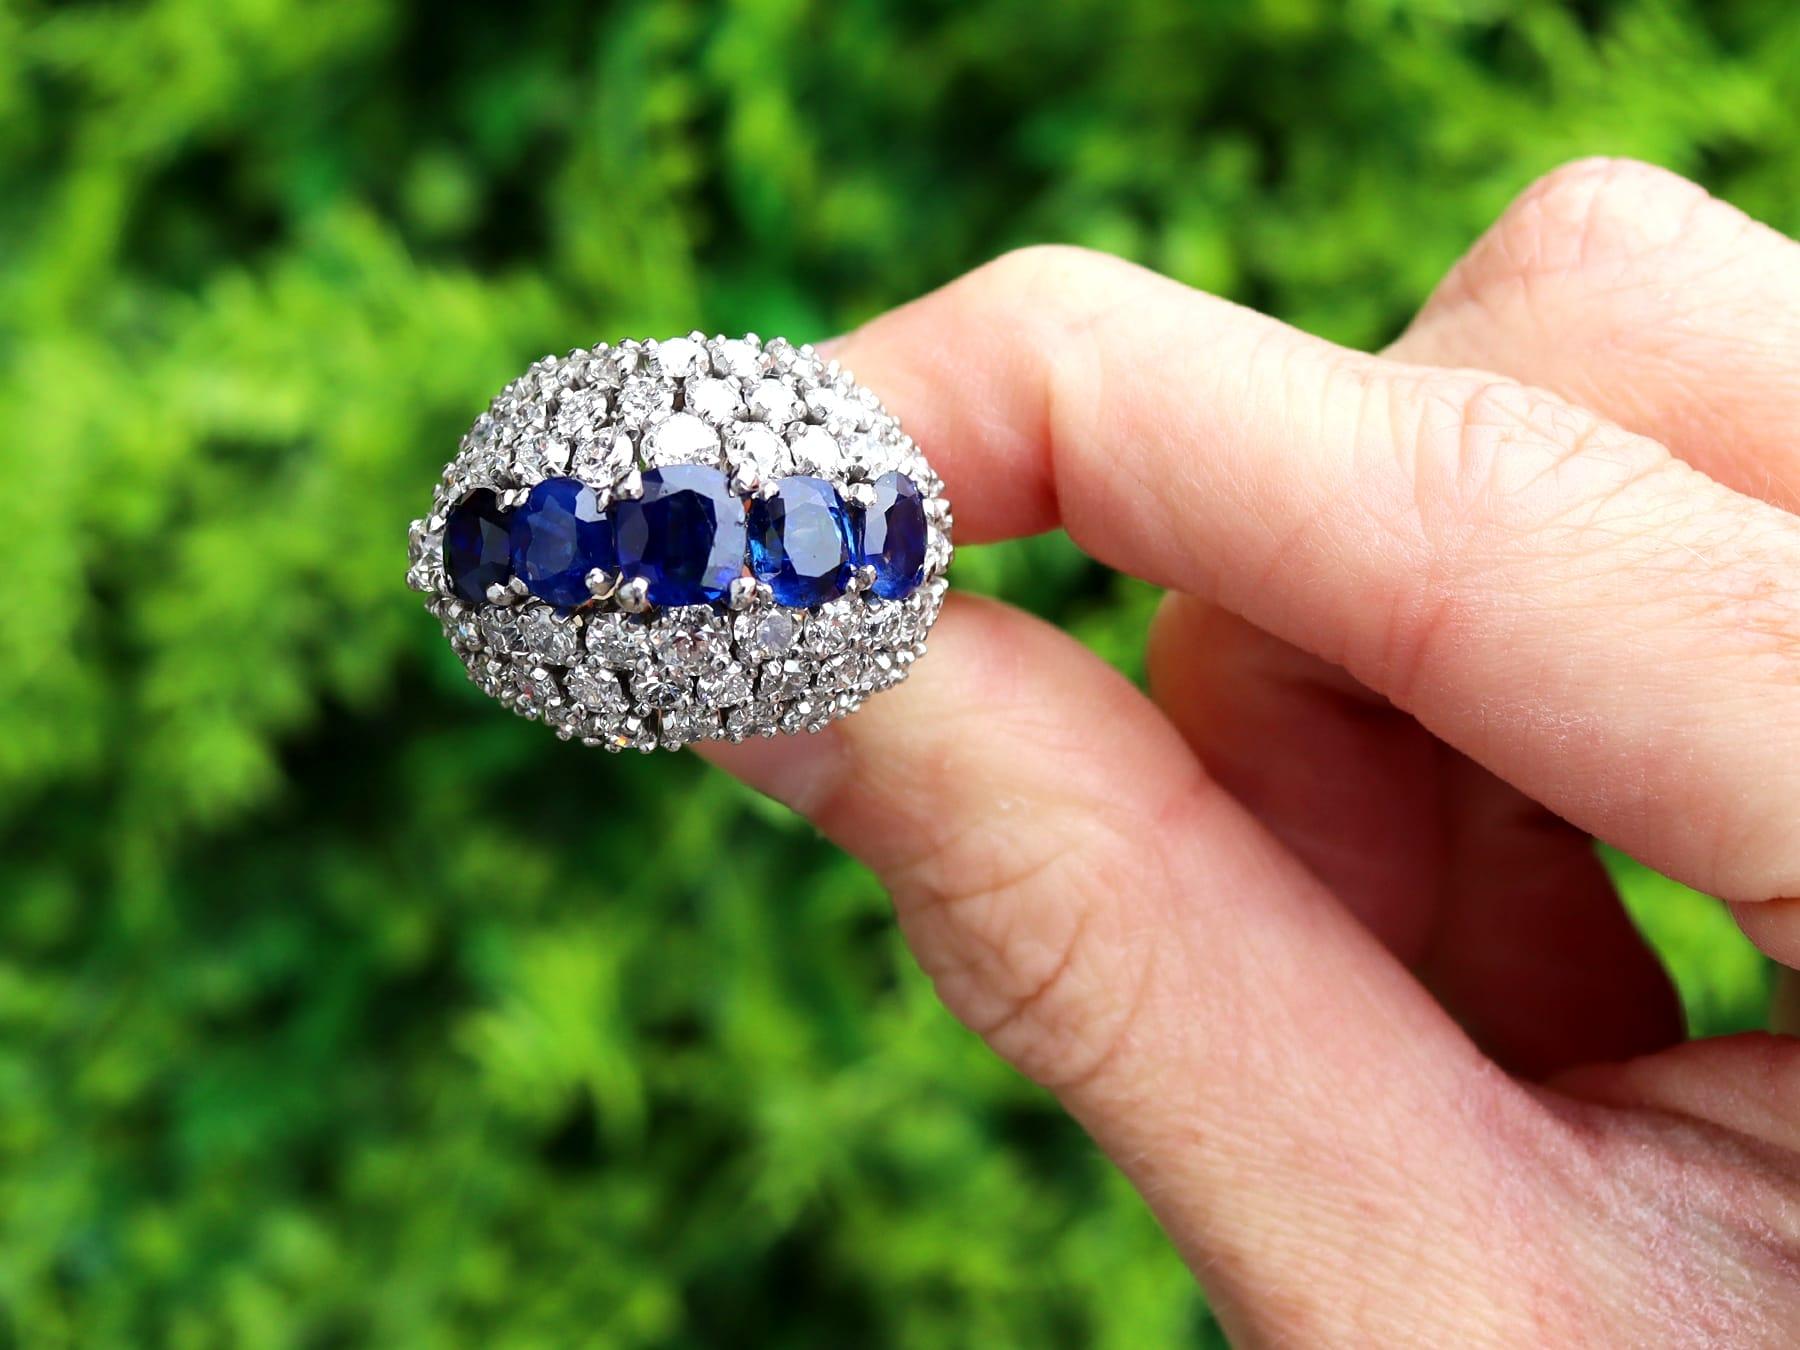 This stunning, fine and impressive vintage 1960s sapphire ring has been crafted in 18k white gold.

The substantial convex pierced decorated ring setting is ornamented with five round faceted cut Basaltic blue sapphires, totalling 5.17cts, all